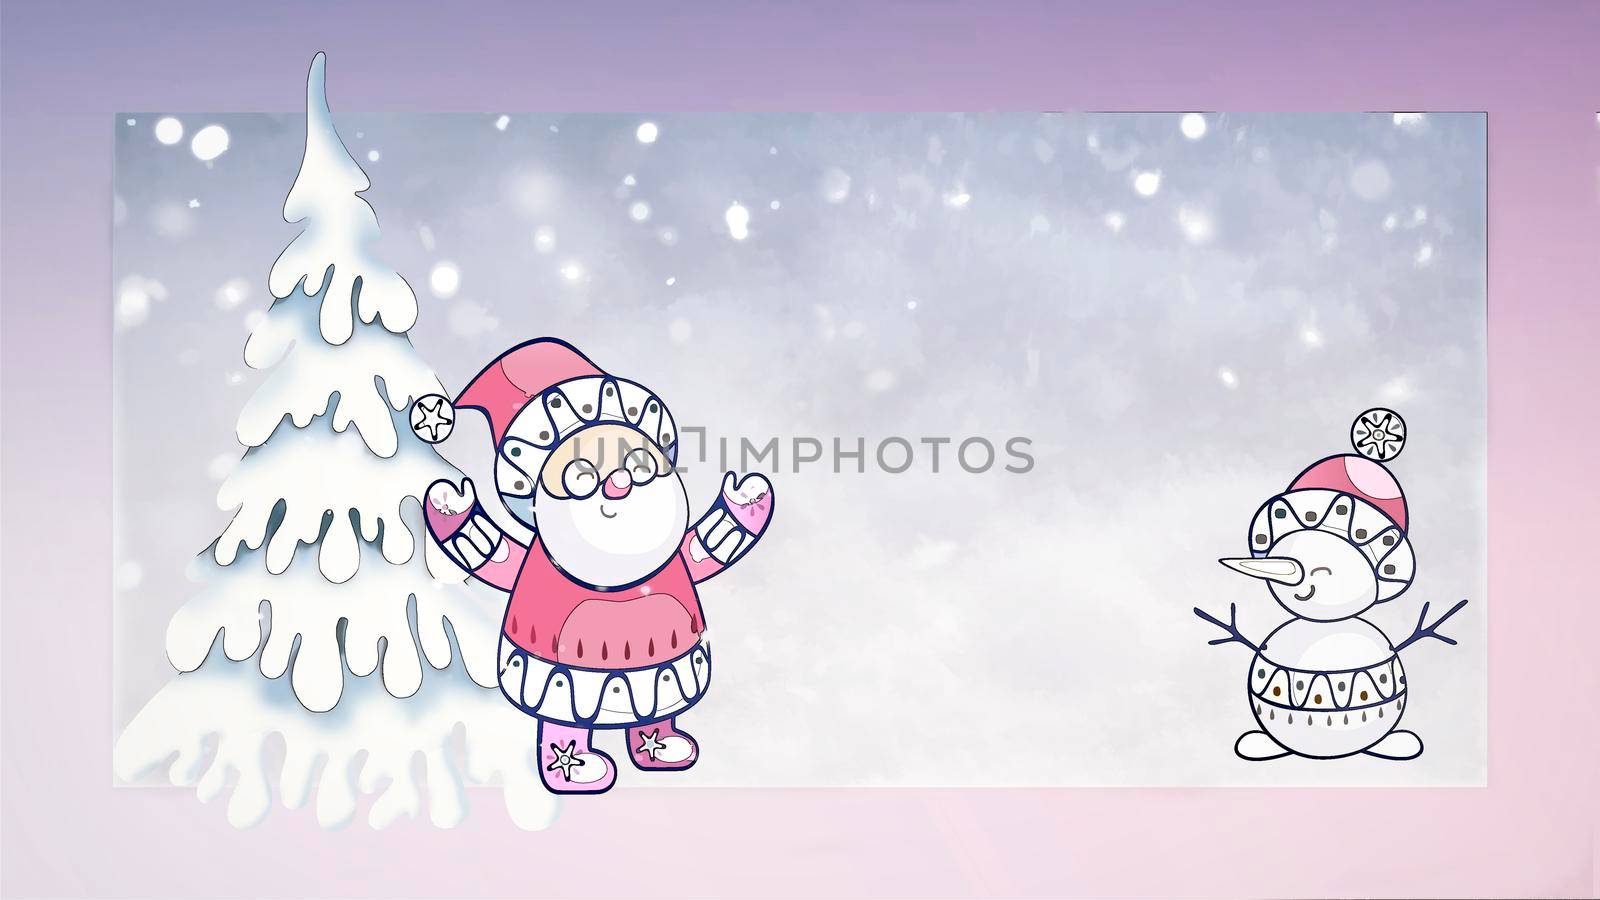 Christmas card with the image of Santa Claus and snowman. by georgina198